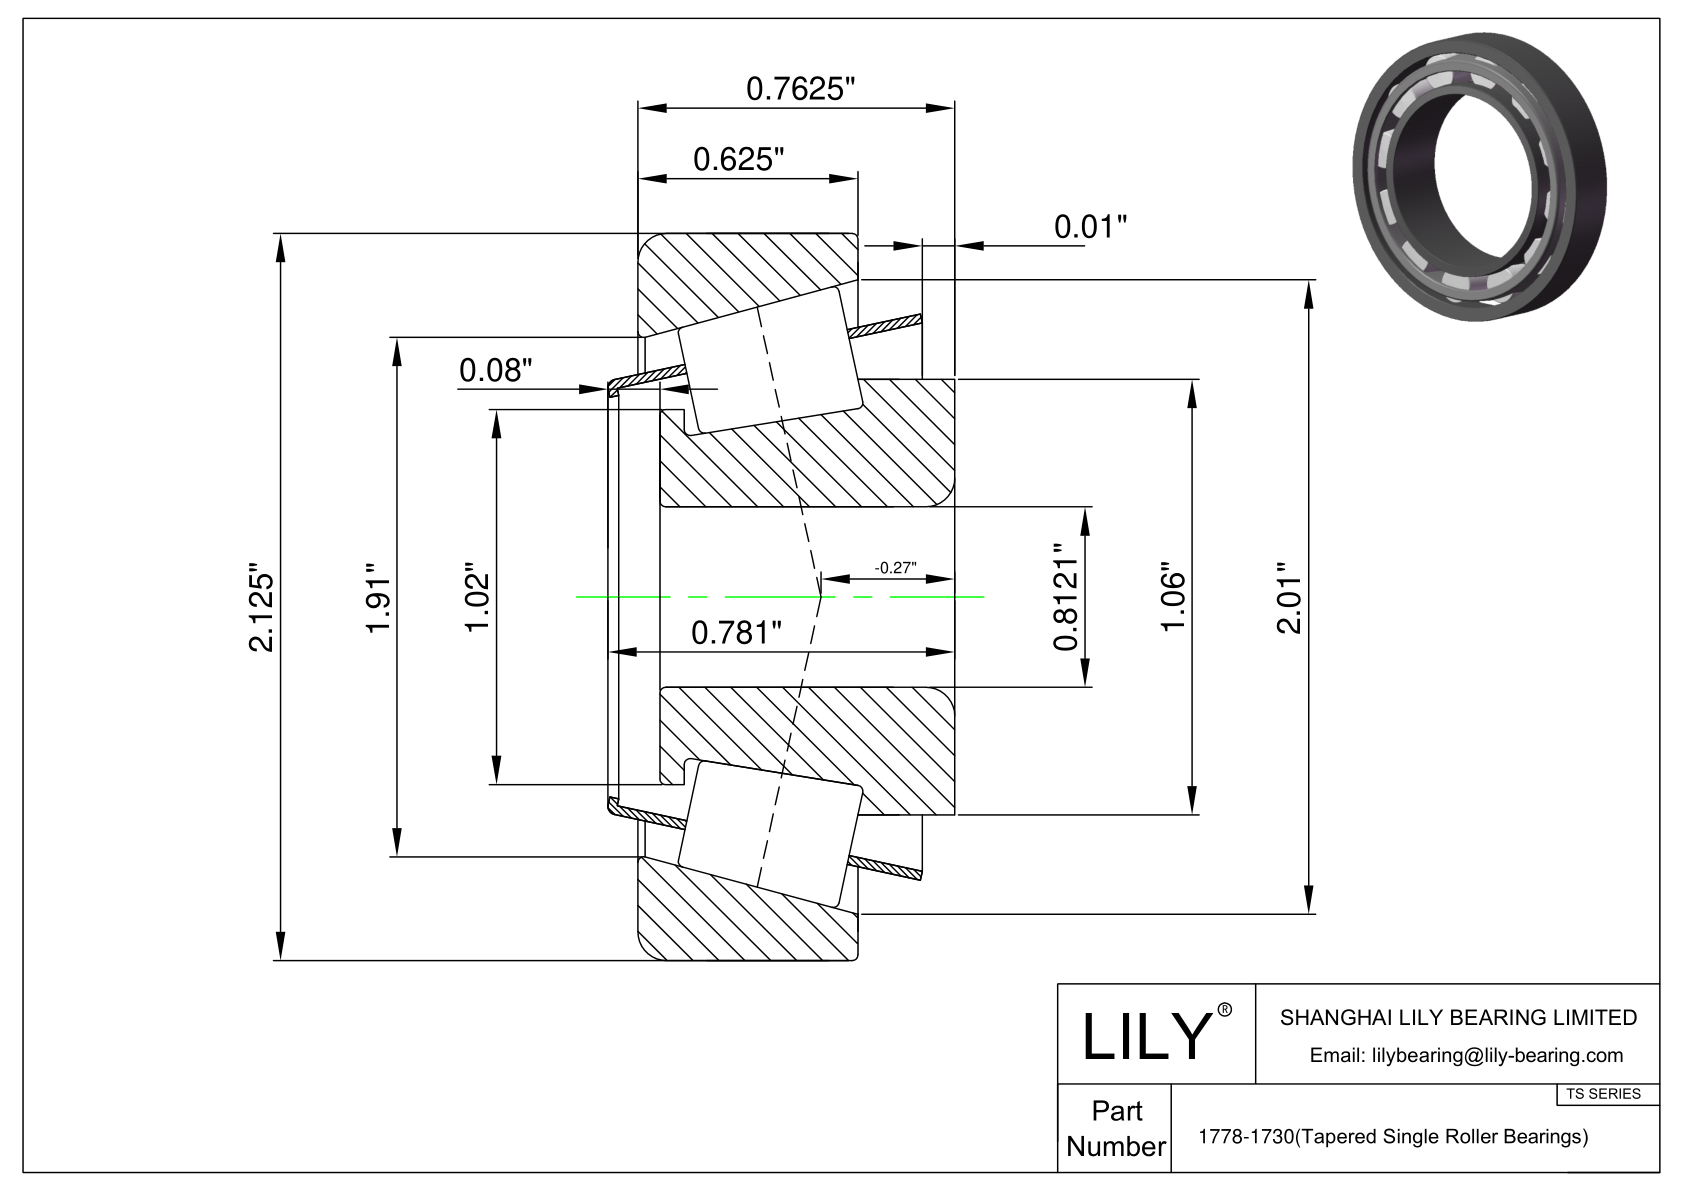 1778-1730 TS (Tapered Single Roller Bearings) (Imperial) cad drawing